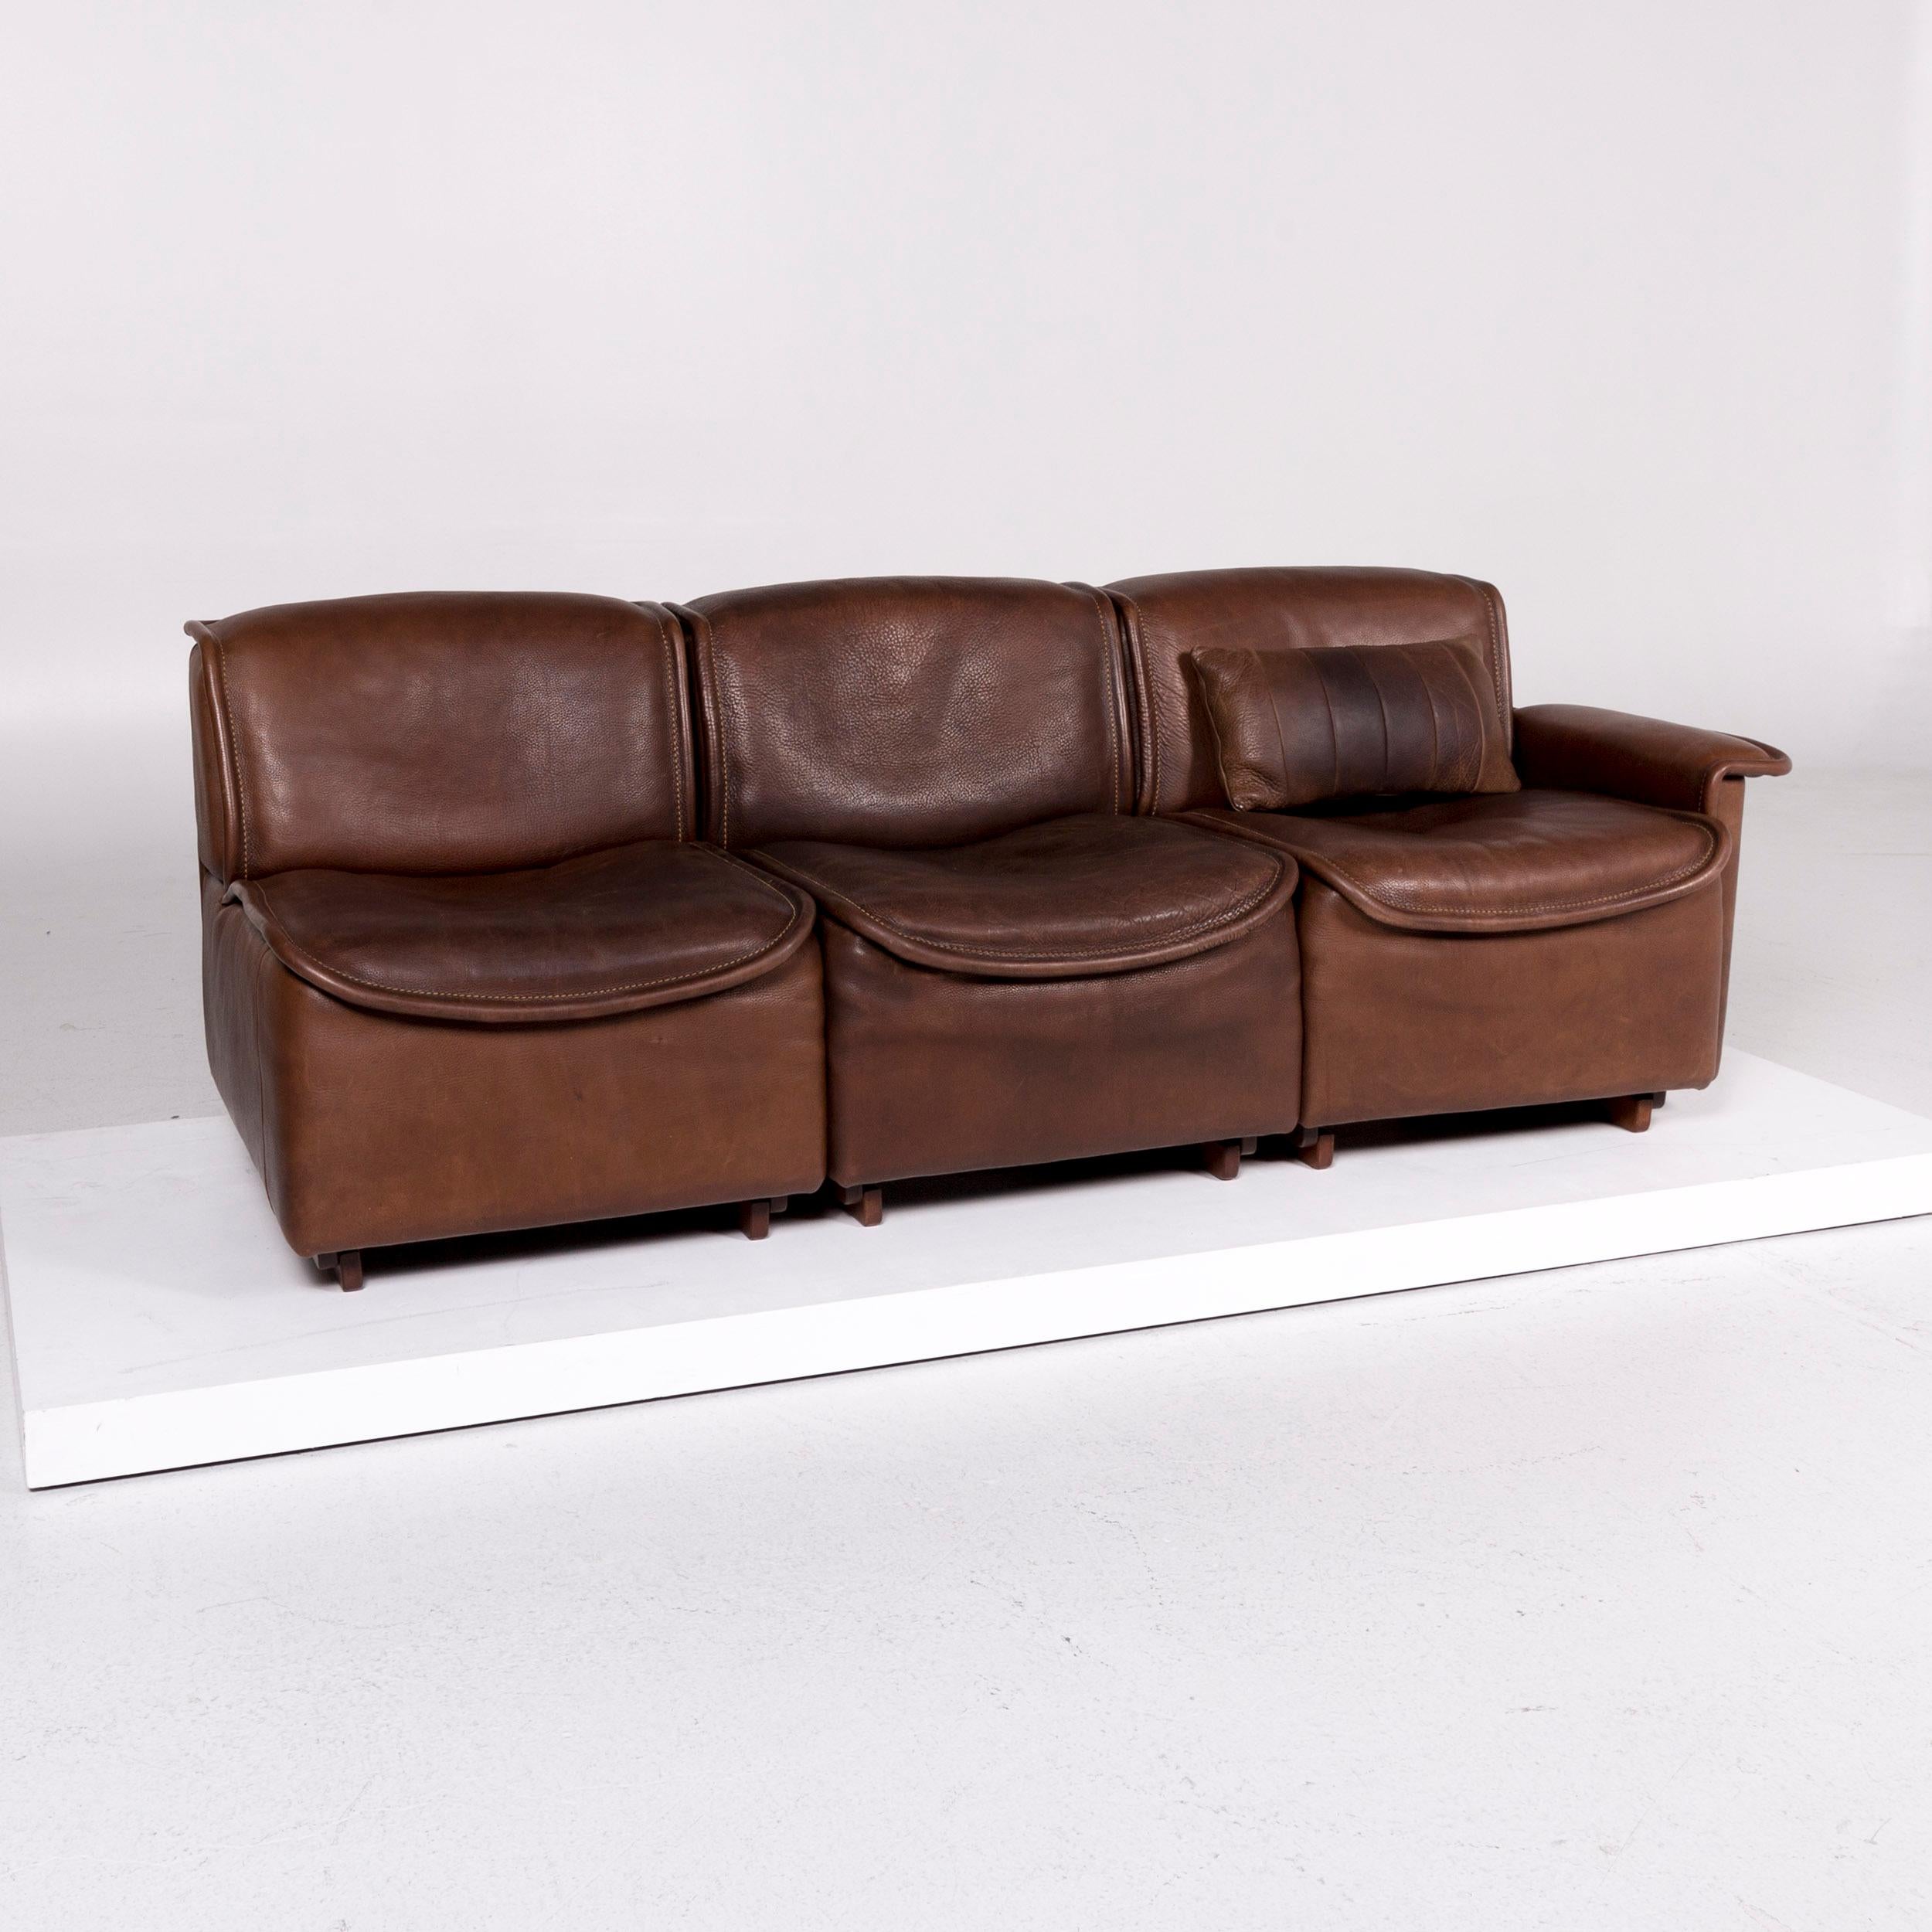 We bring to you a De Sede DS 12 leather sofa brown three-seat couch.
 

 Product measurements in centimeters:
 

Depth 81
Width 204
Height 73
Seat-height 43
Rest-height 53
Seat-depth 52
Seat-width 204
Back-height 31.
 